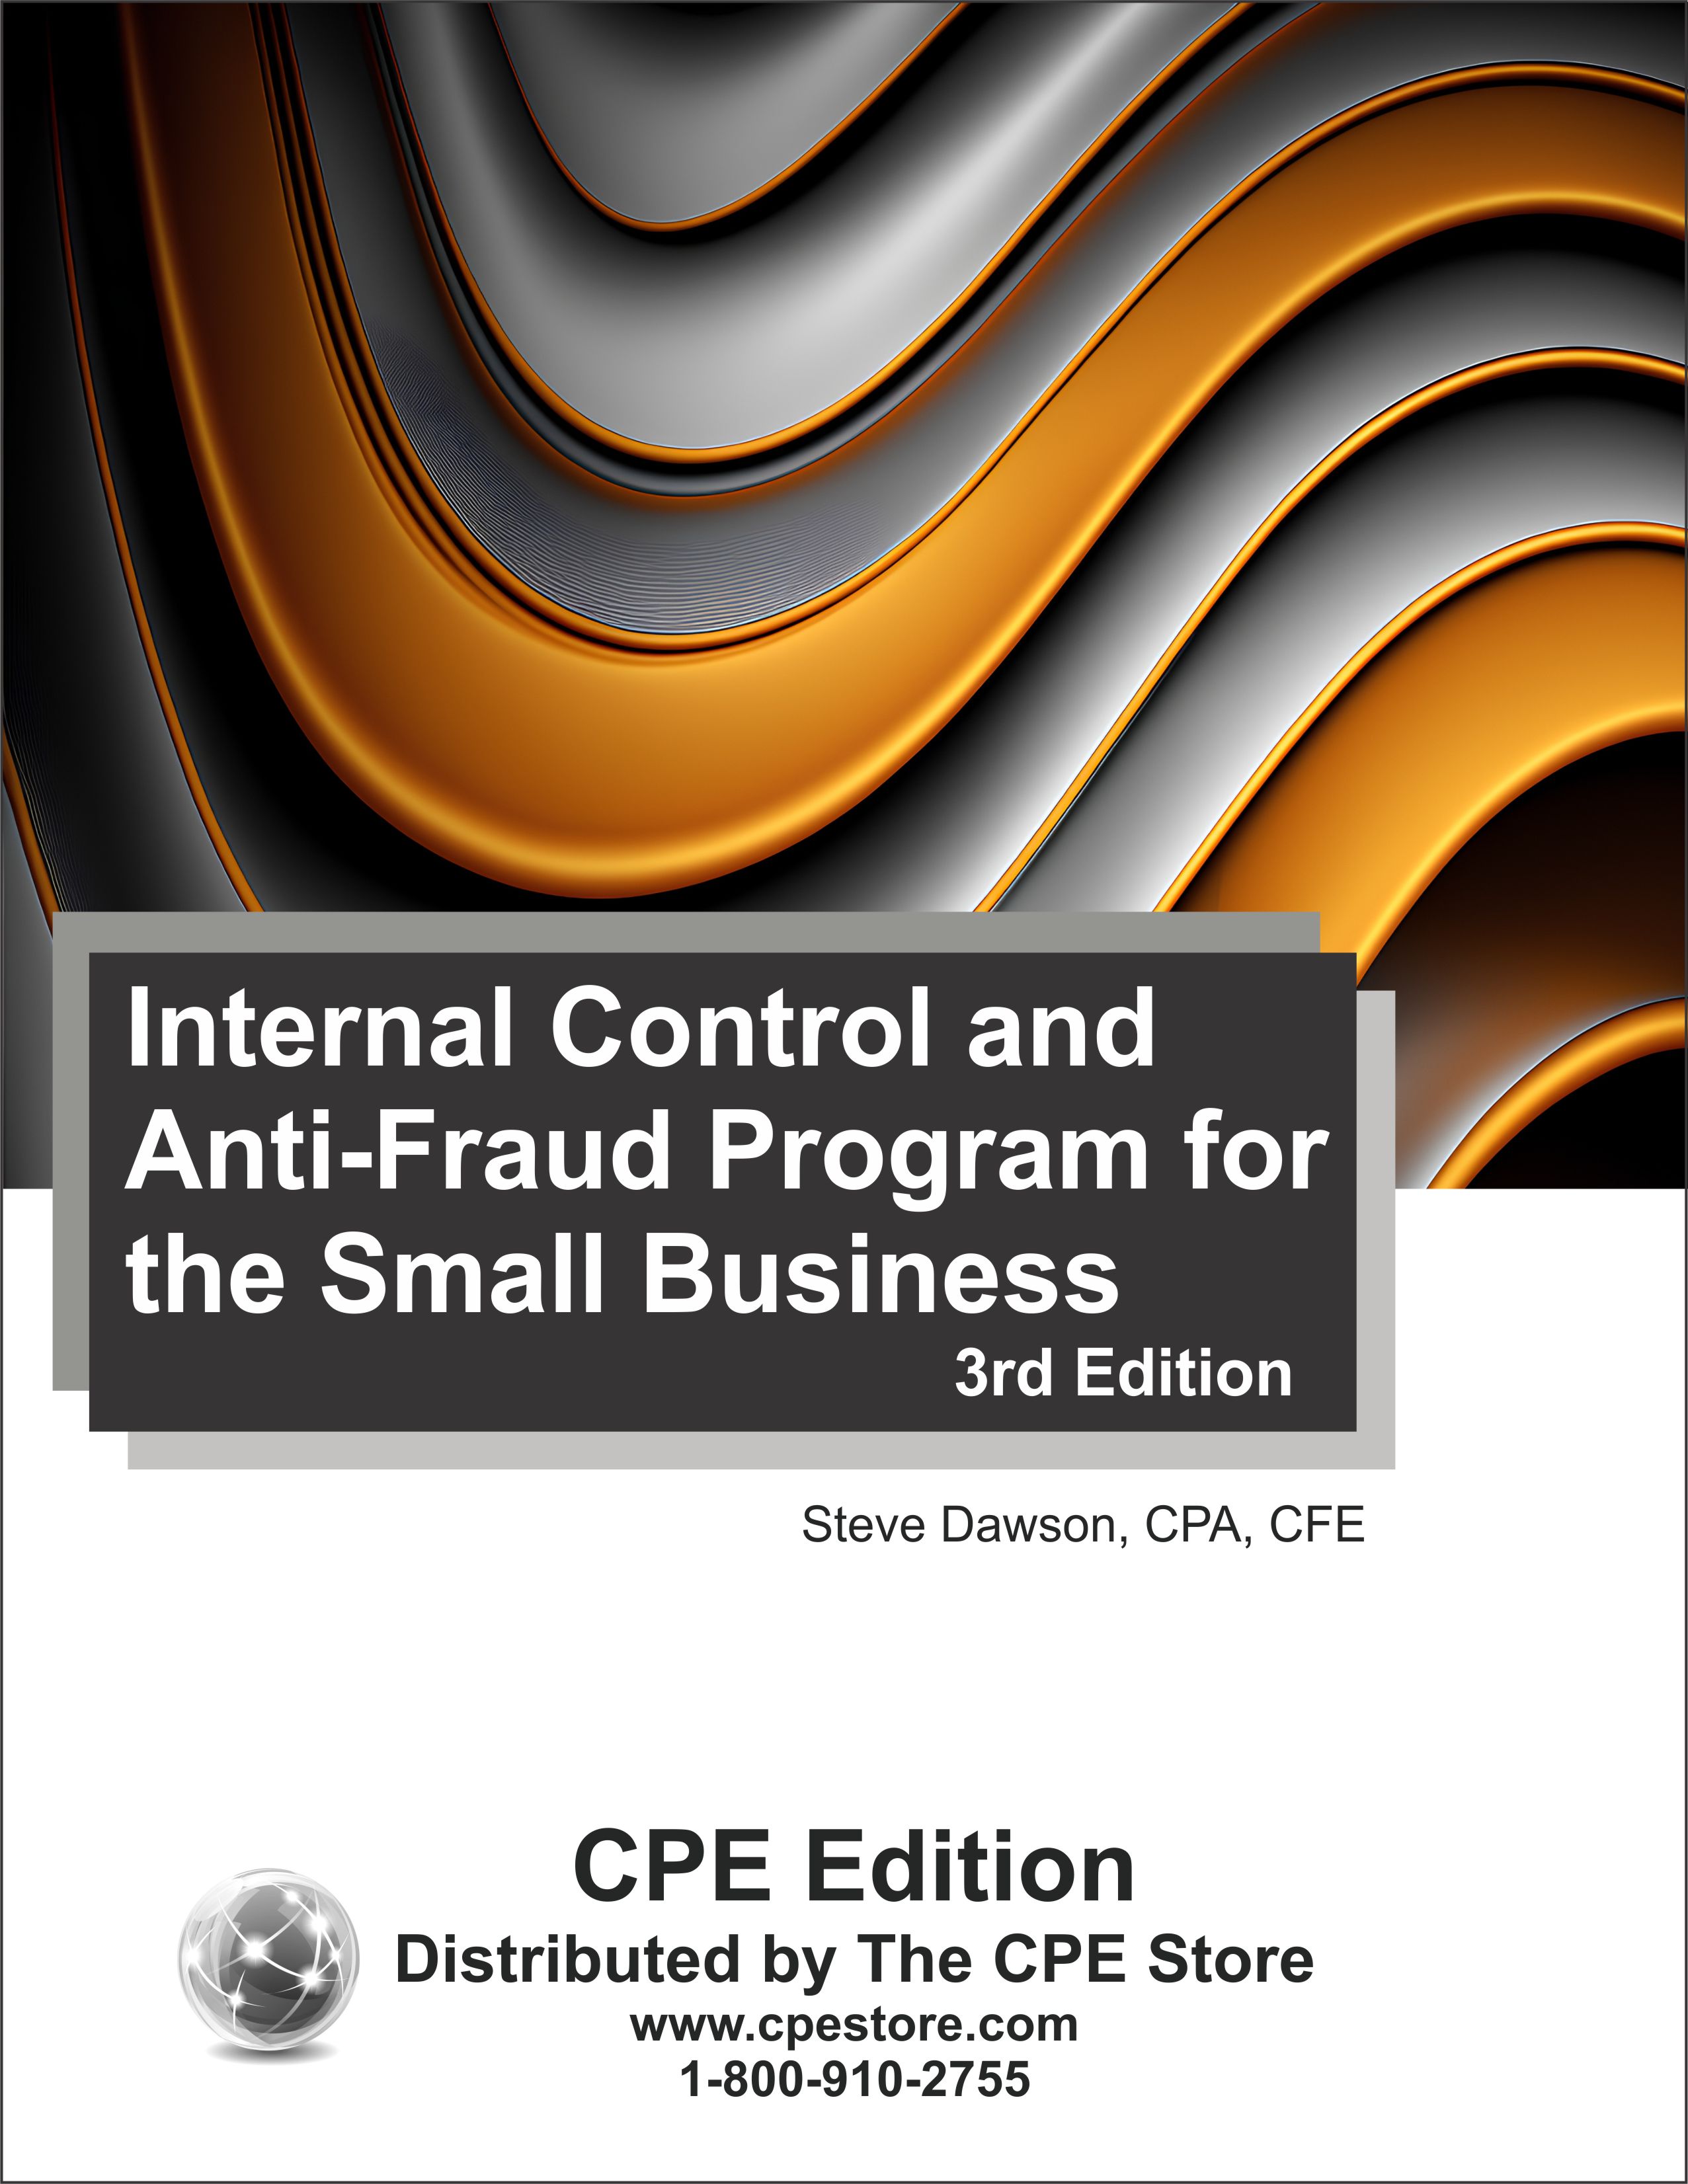 Internal Control and Anti-Fraud Program for the Small Business